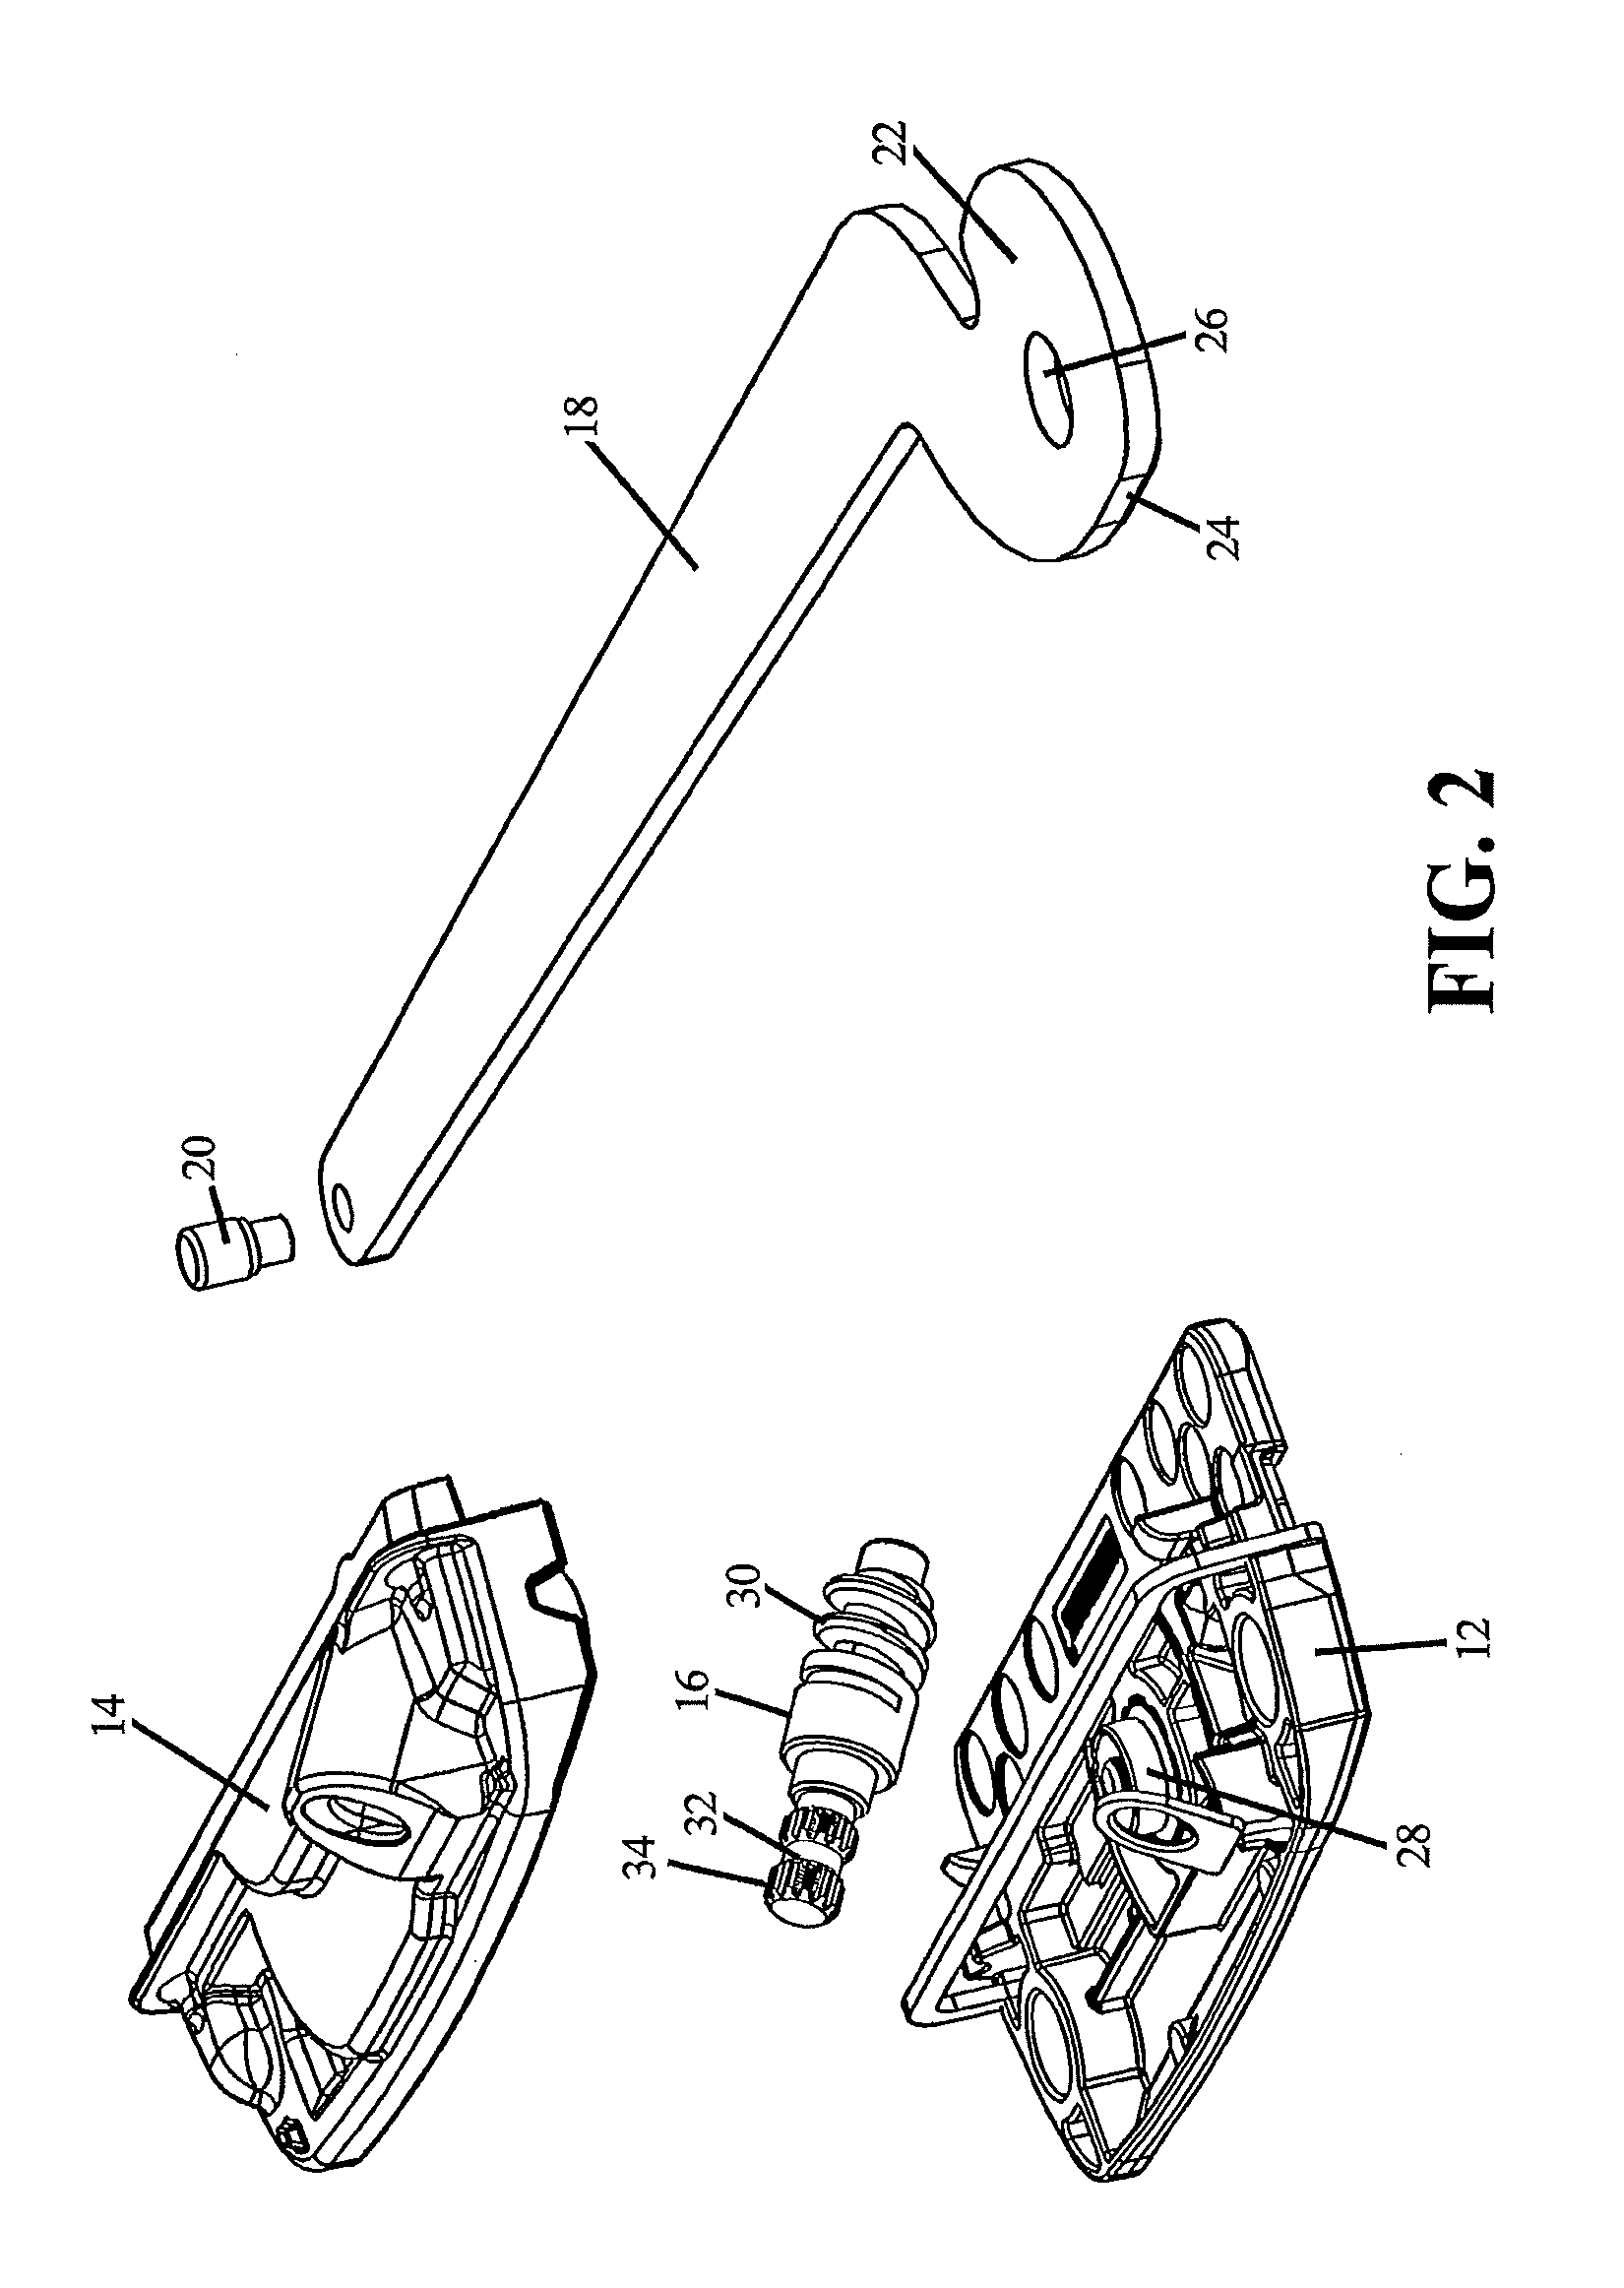 Adjustable operator worm gear drive with robust bearing surfaces